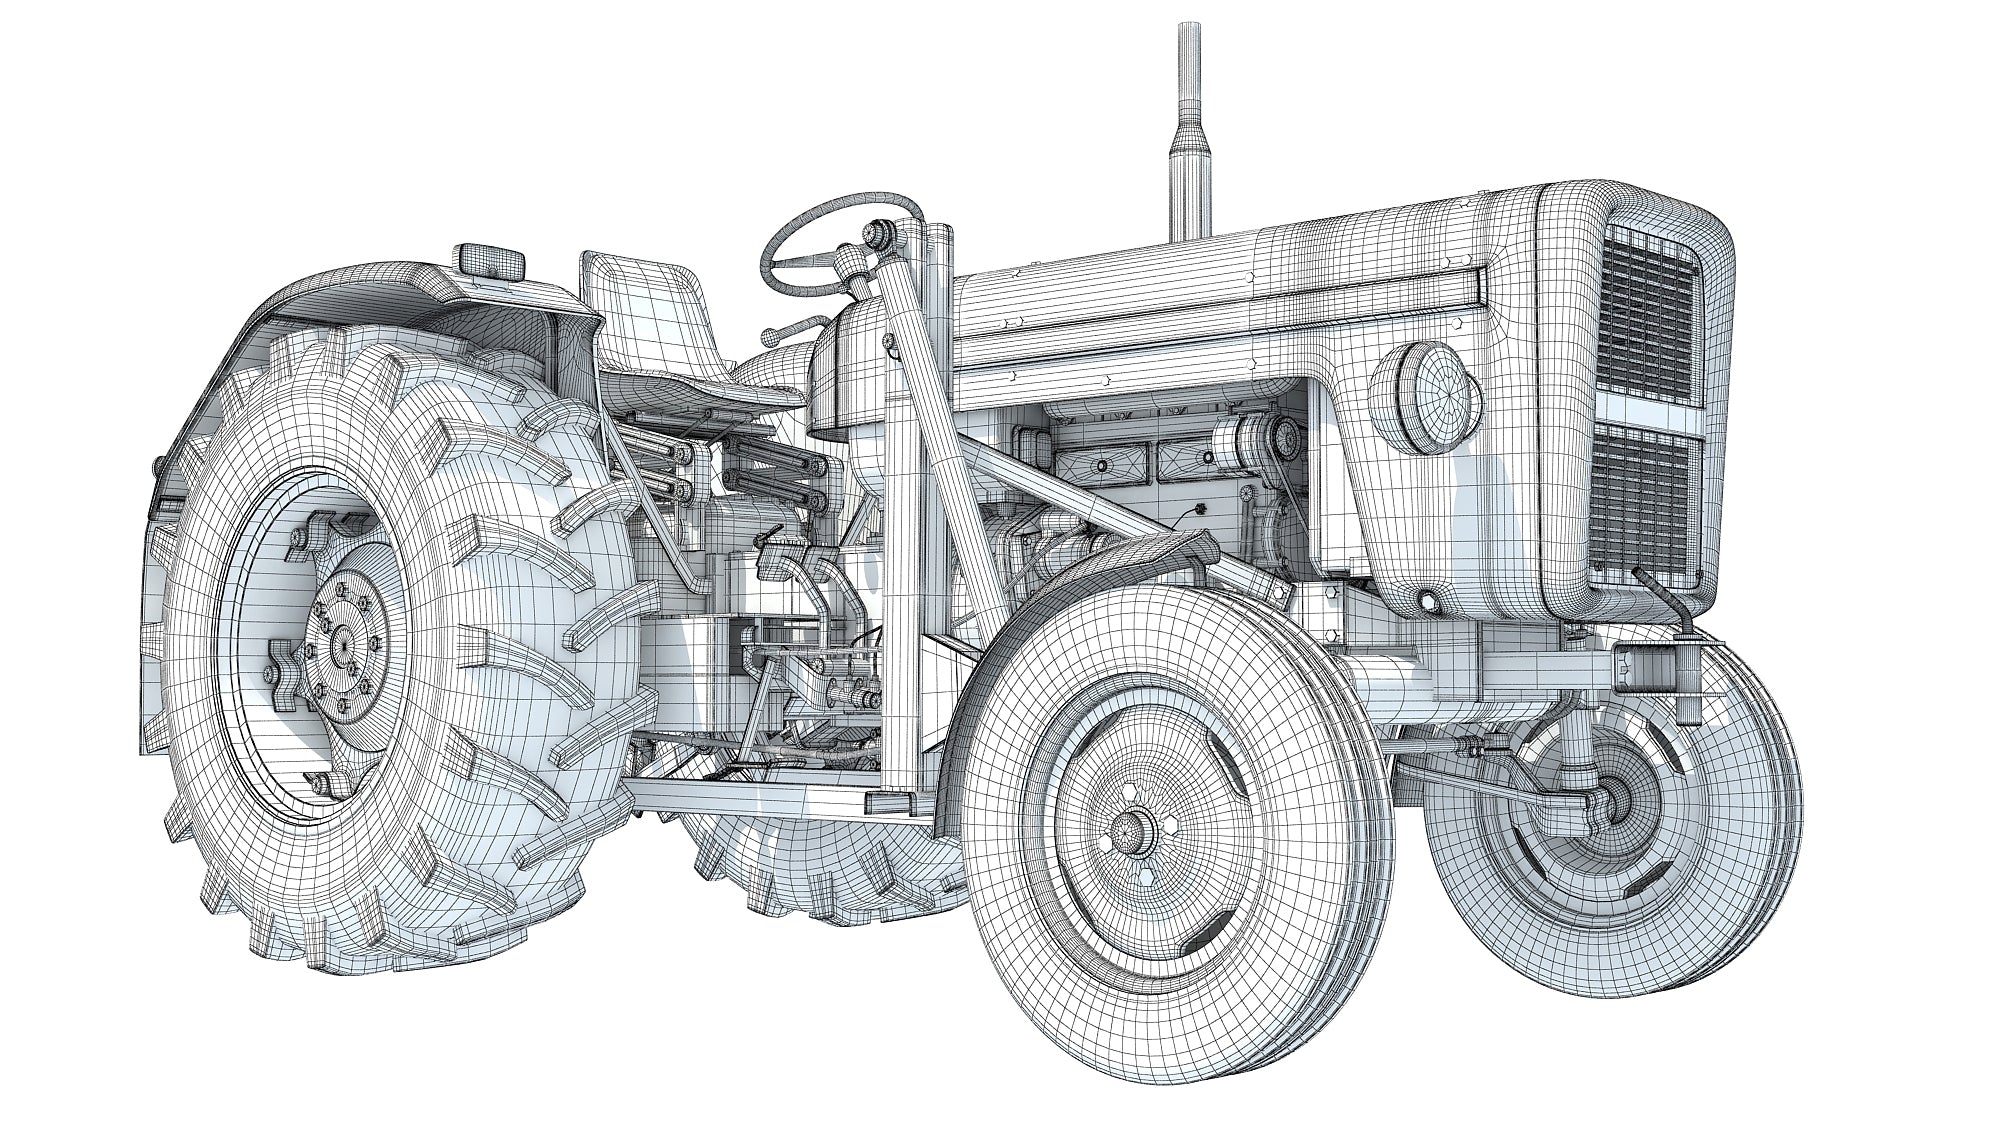 Sketch of tractor vehicle for agriculture  vector illustration  CanStock